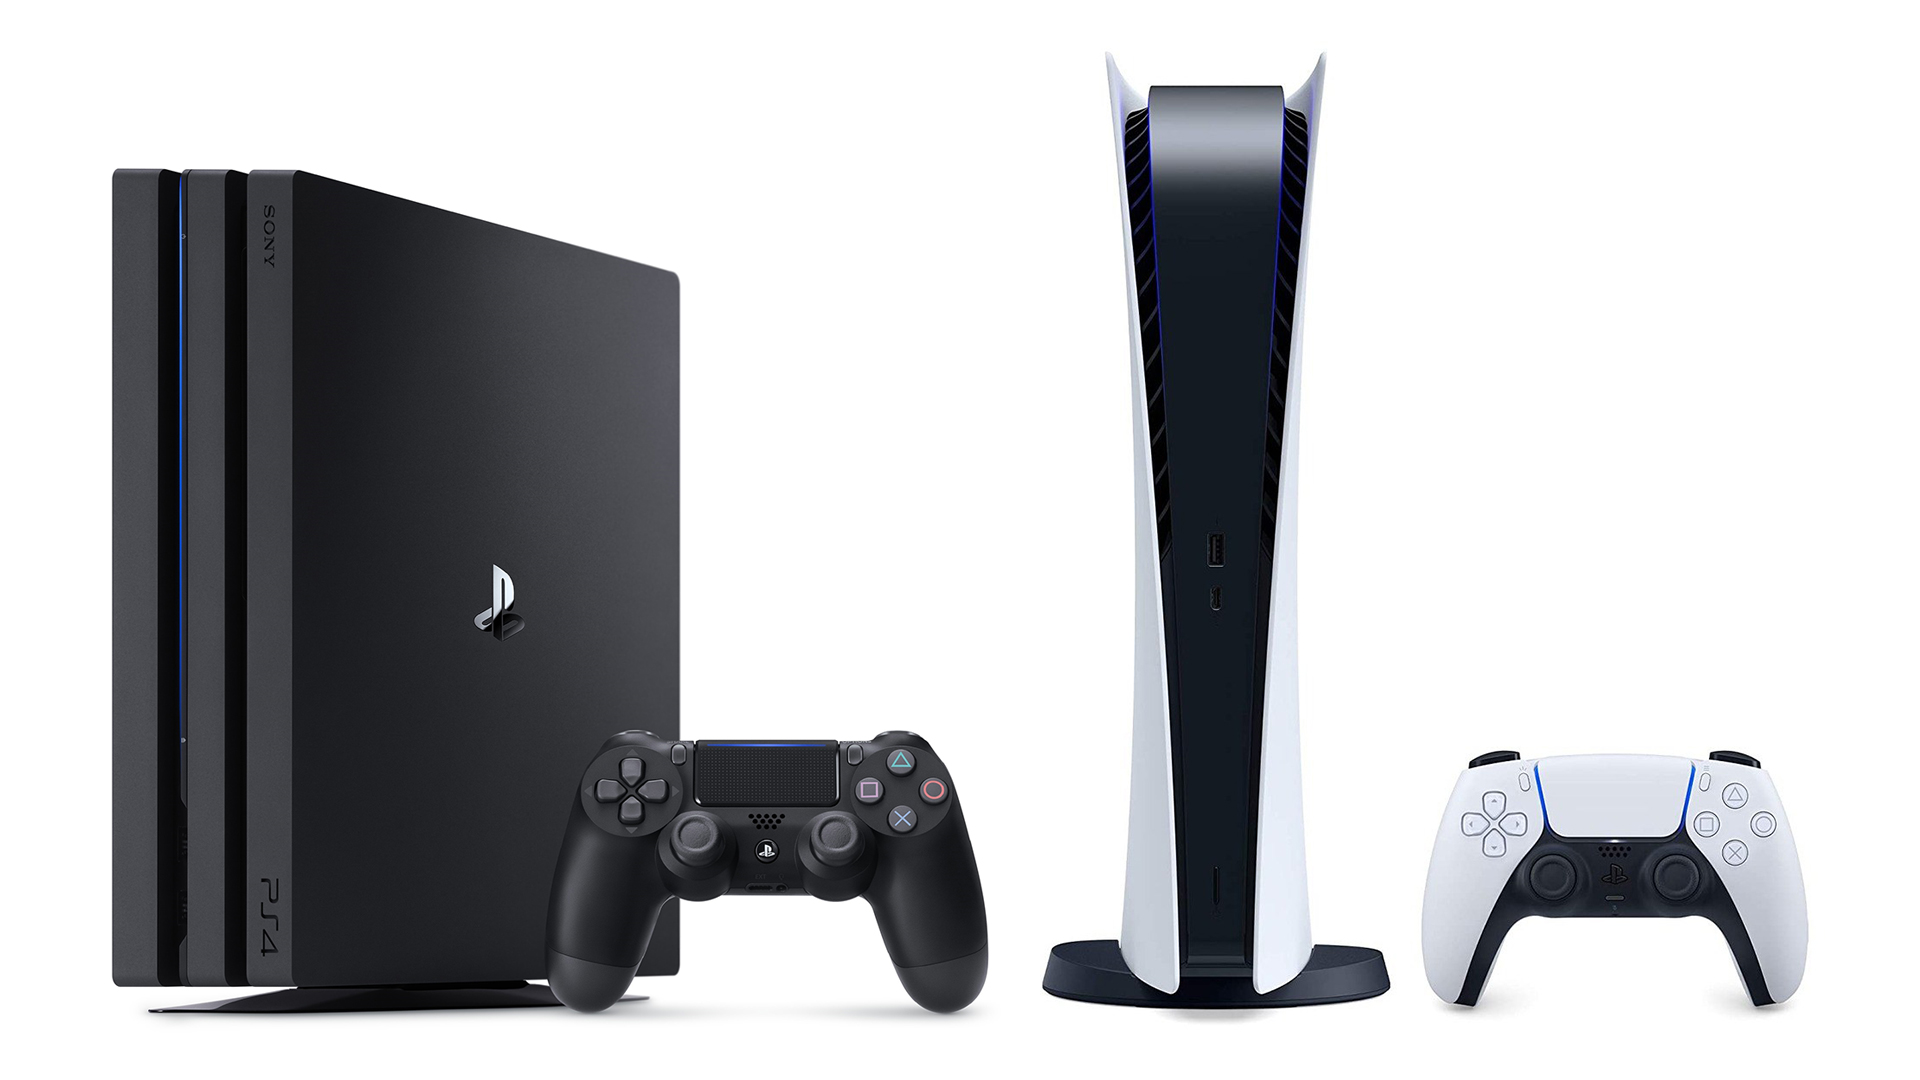 Game On: PlayStation 4 will be phased out starting in 2025, and that's OK